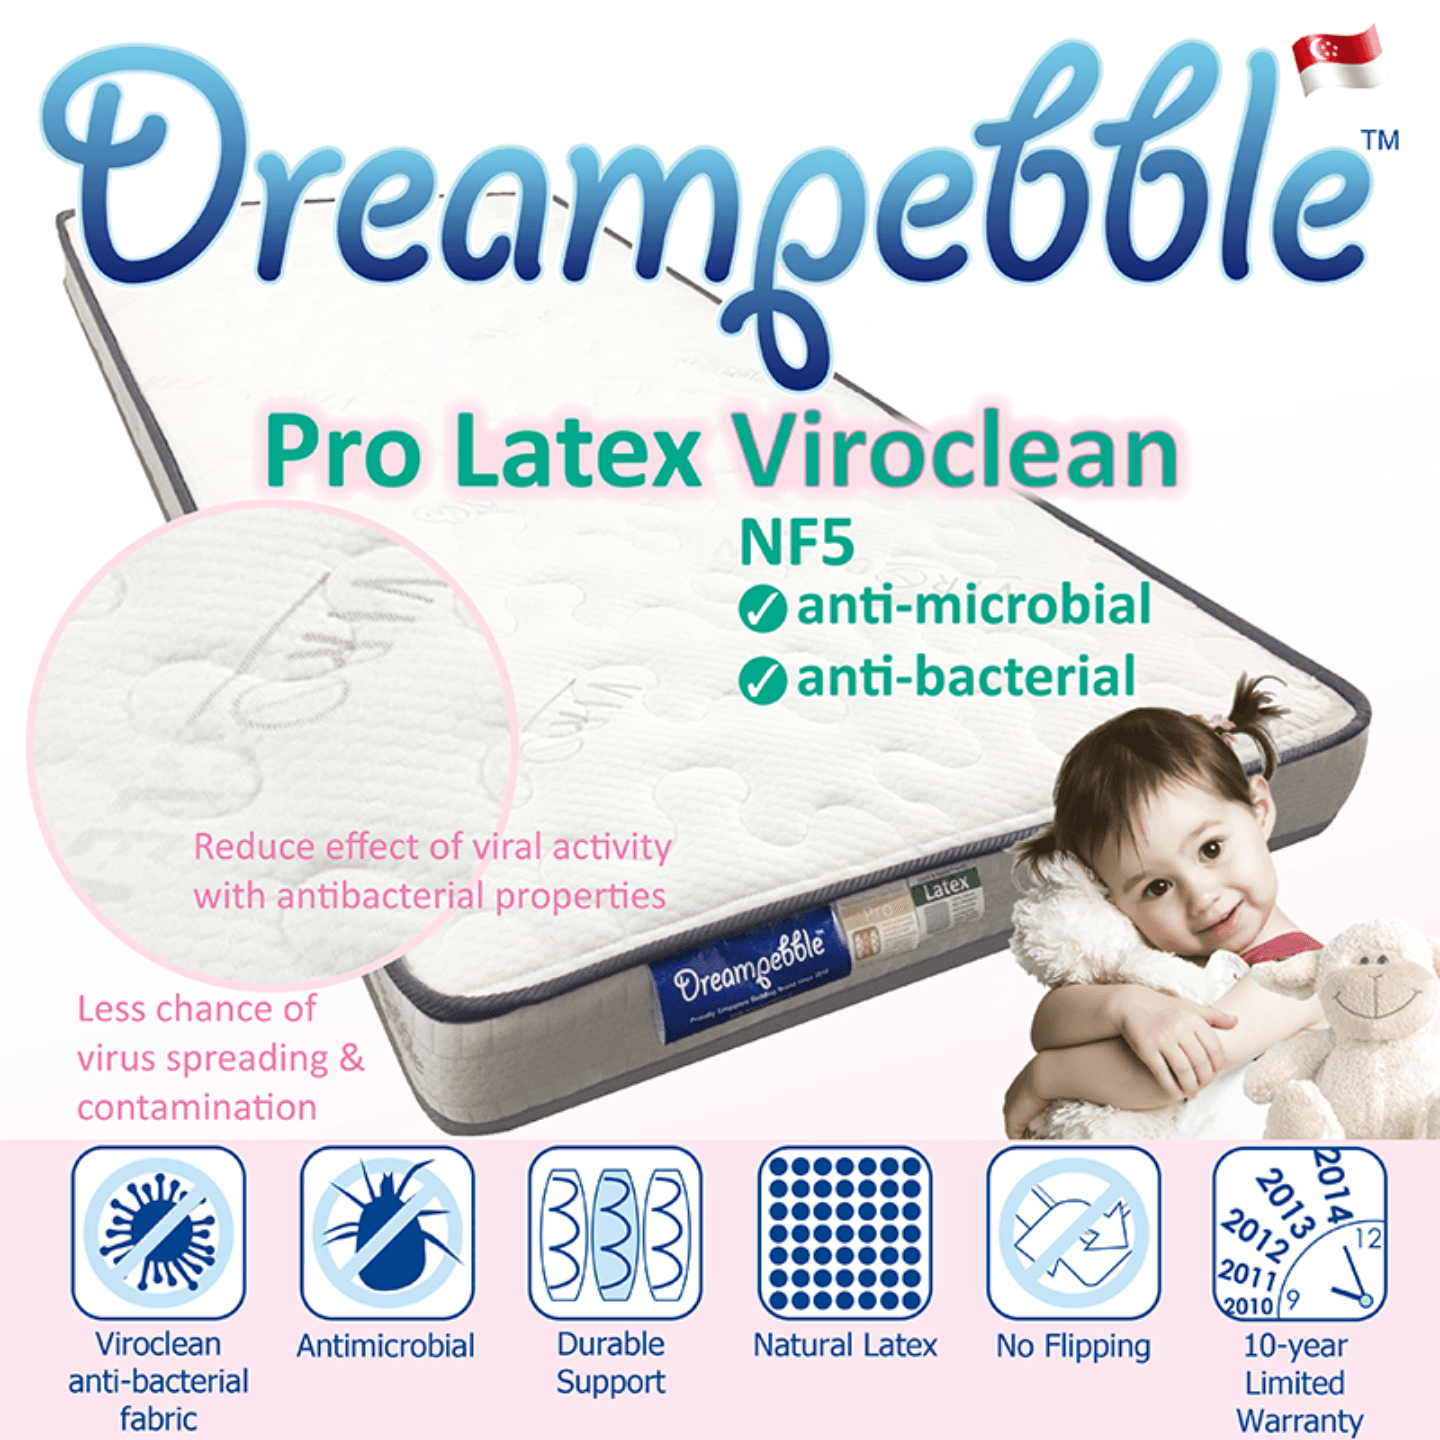 Dreampebble 5" Pro Latex Viroclean Pocketed Spring Mattress - Kids Haven